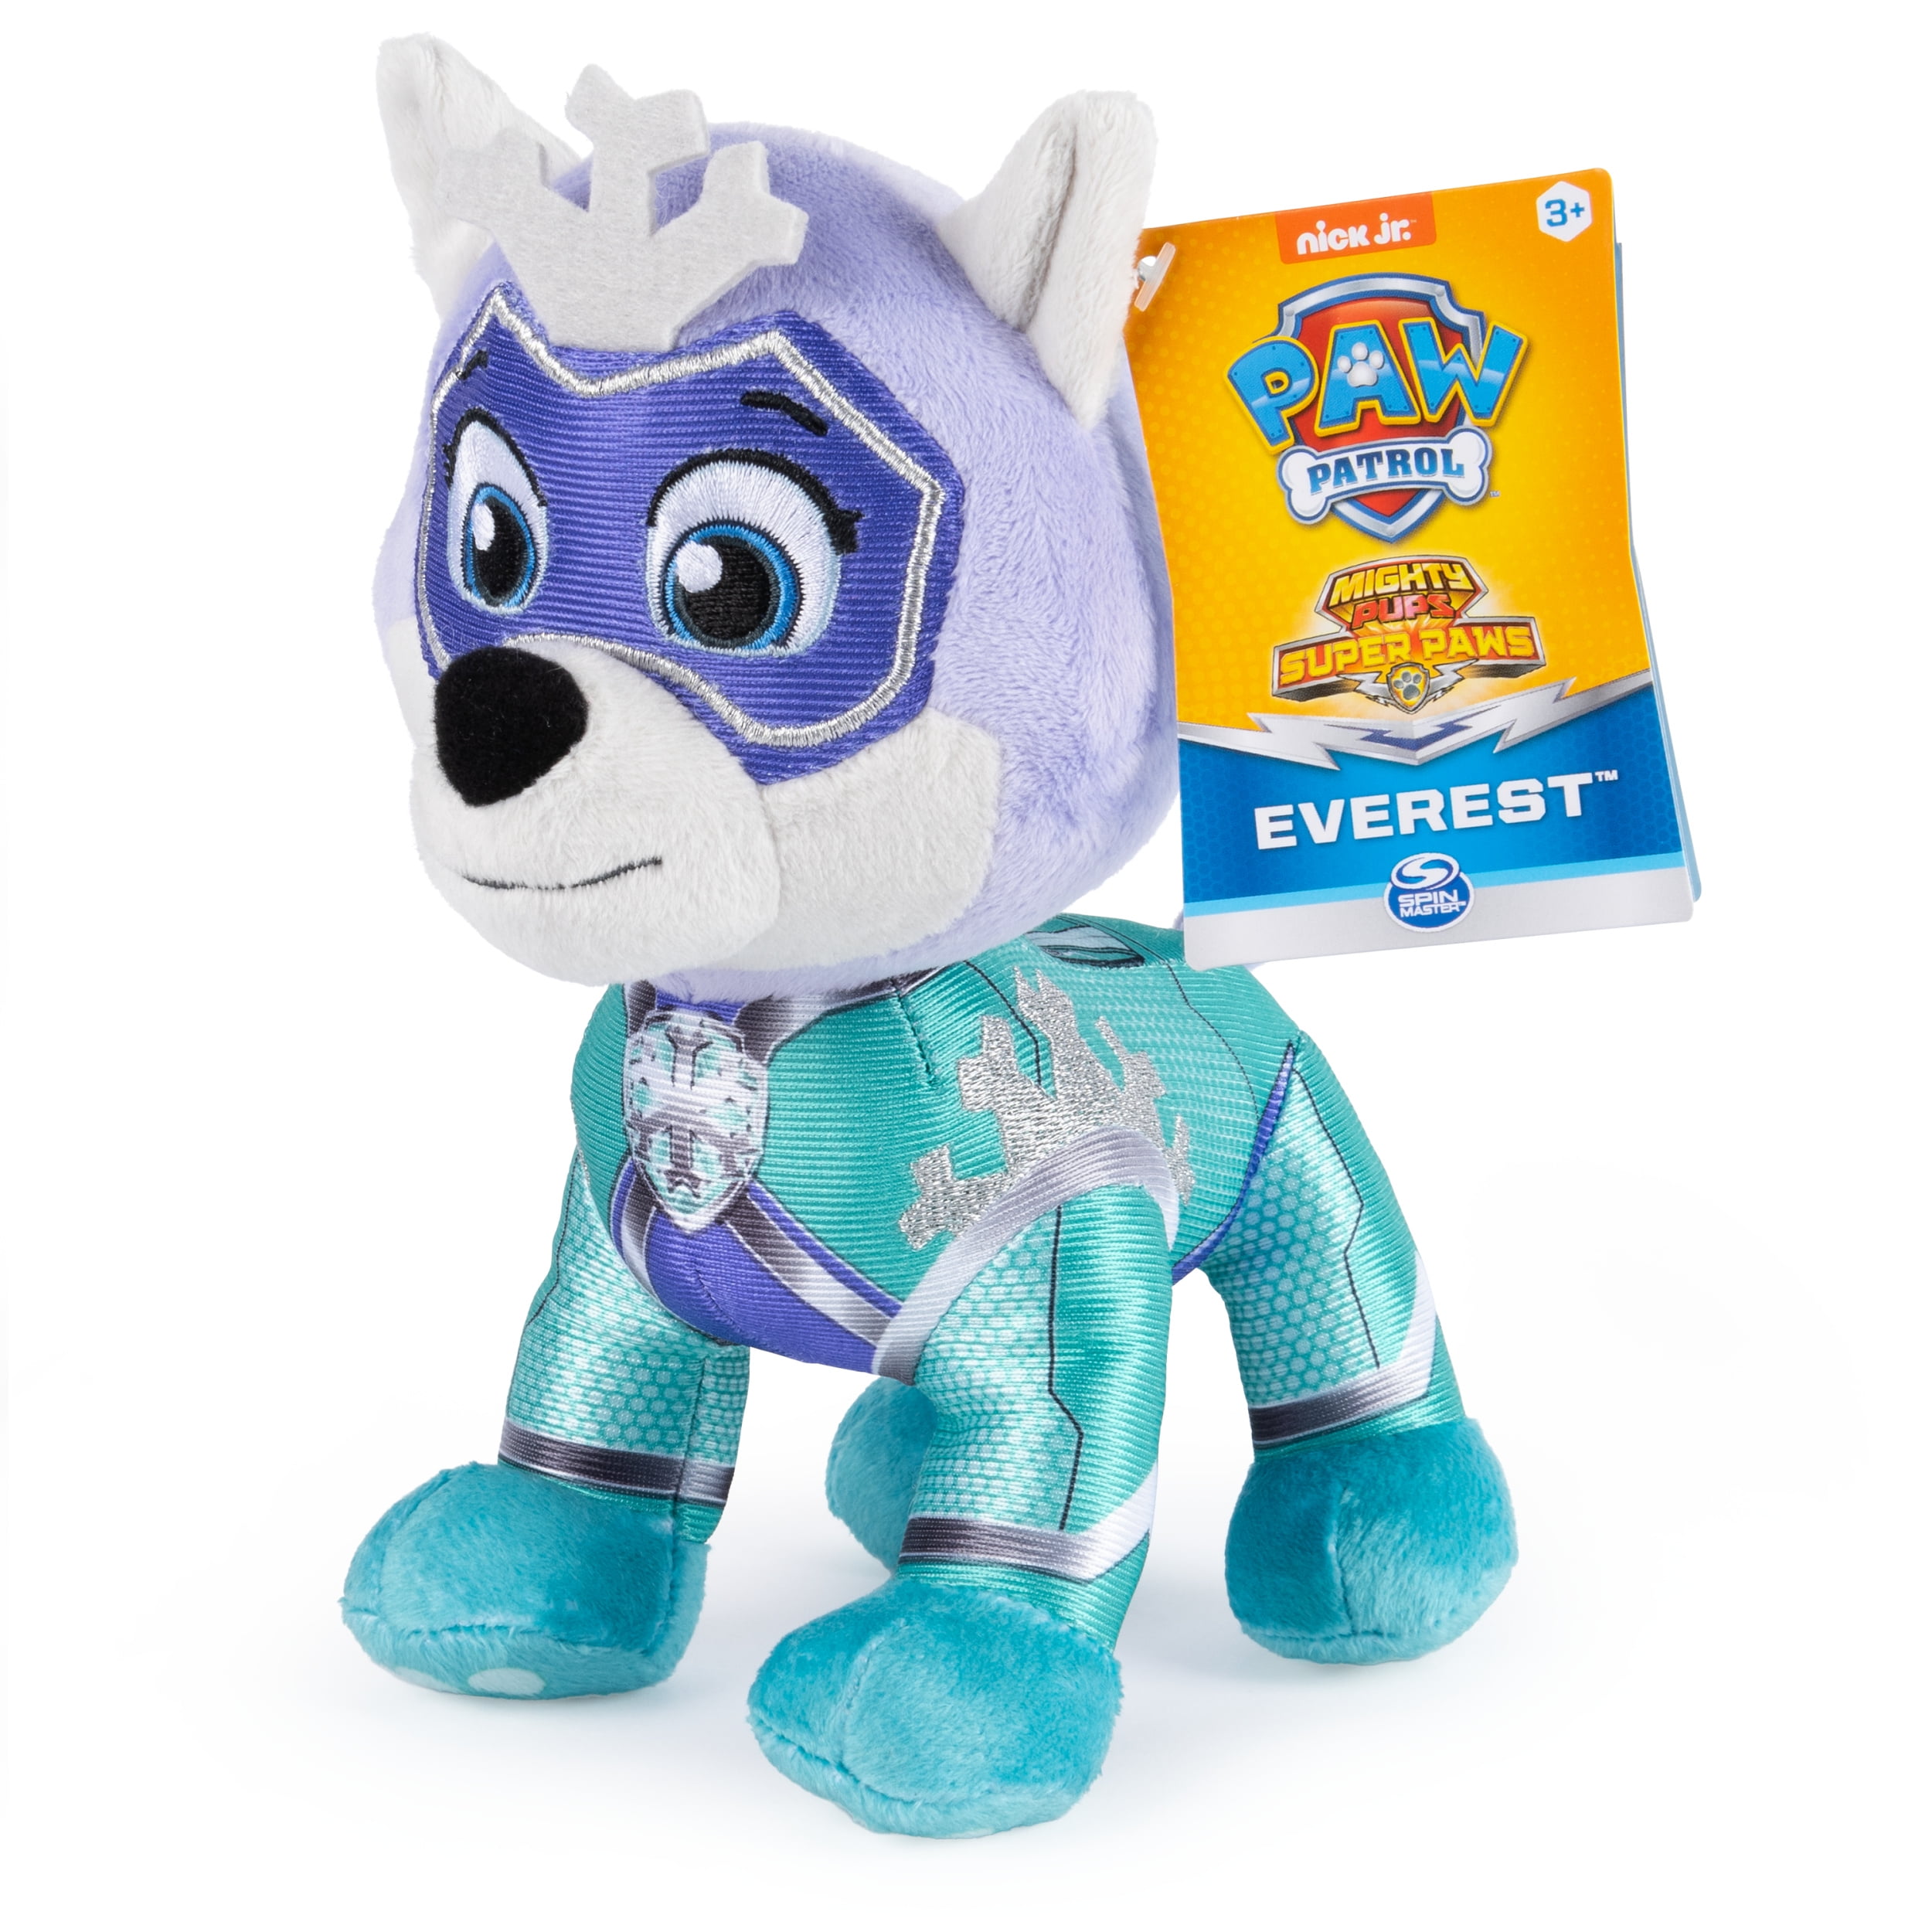 Nickelodeon Paw Patrol Plush Everest Mighty Pups Super Paws Nick Jr for sale online